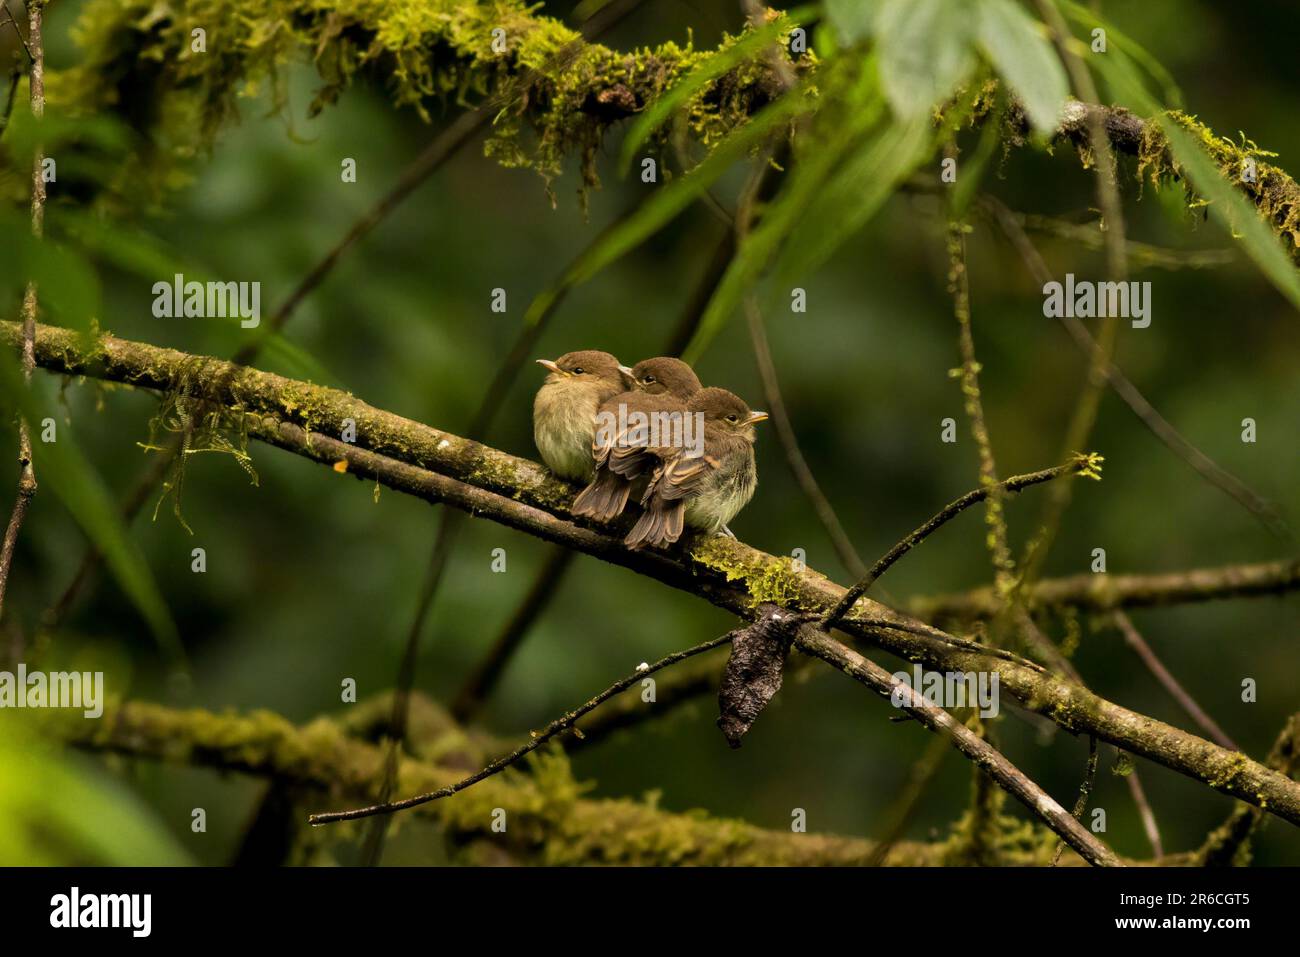 Several Pied flycatchers perched on a barren tree branch in a murky forest setting Stock Photo